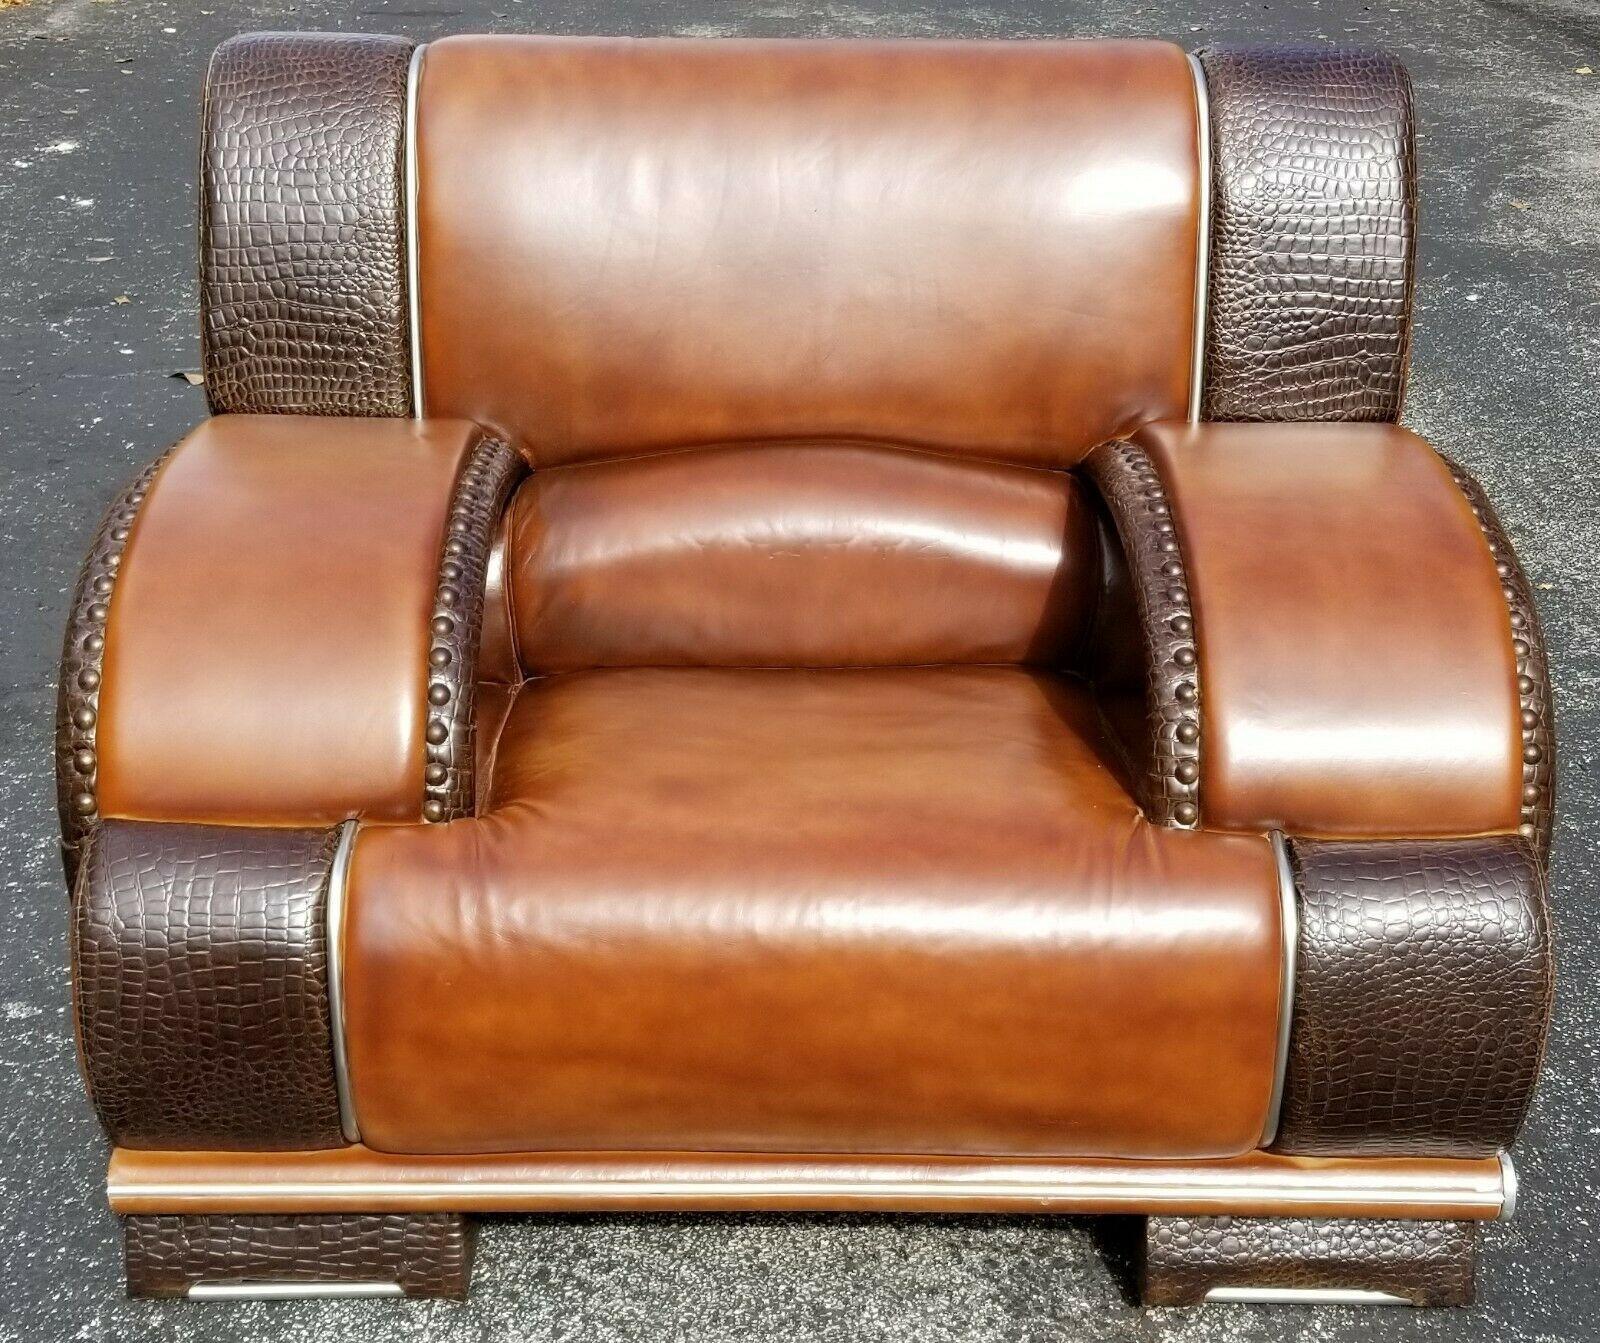 Offering one of our recent Palm Beach estate fine furniture acquisitions of a
exceptional and very comfortable, vintage custom made real leather and crocodile skin lounge chair
Featuring real Crocodile studded with brass nail trim, and chrome piping